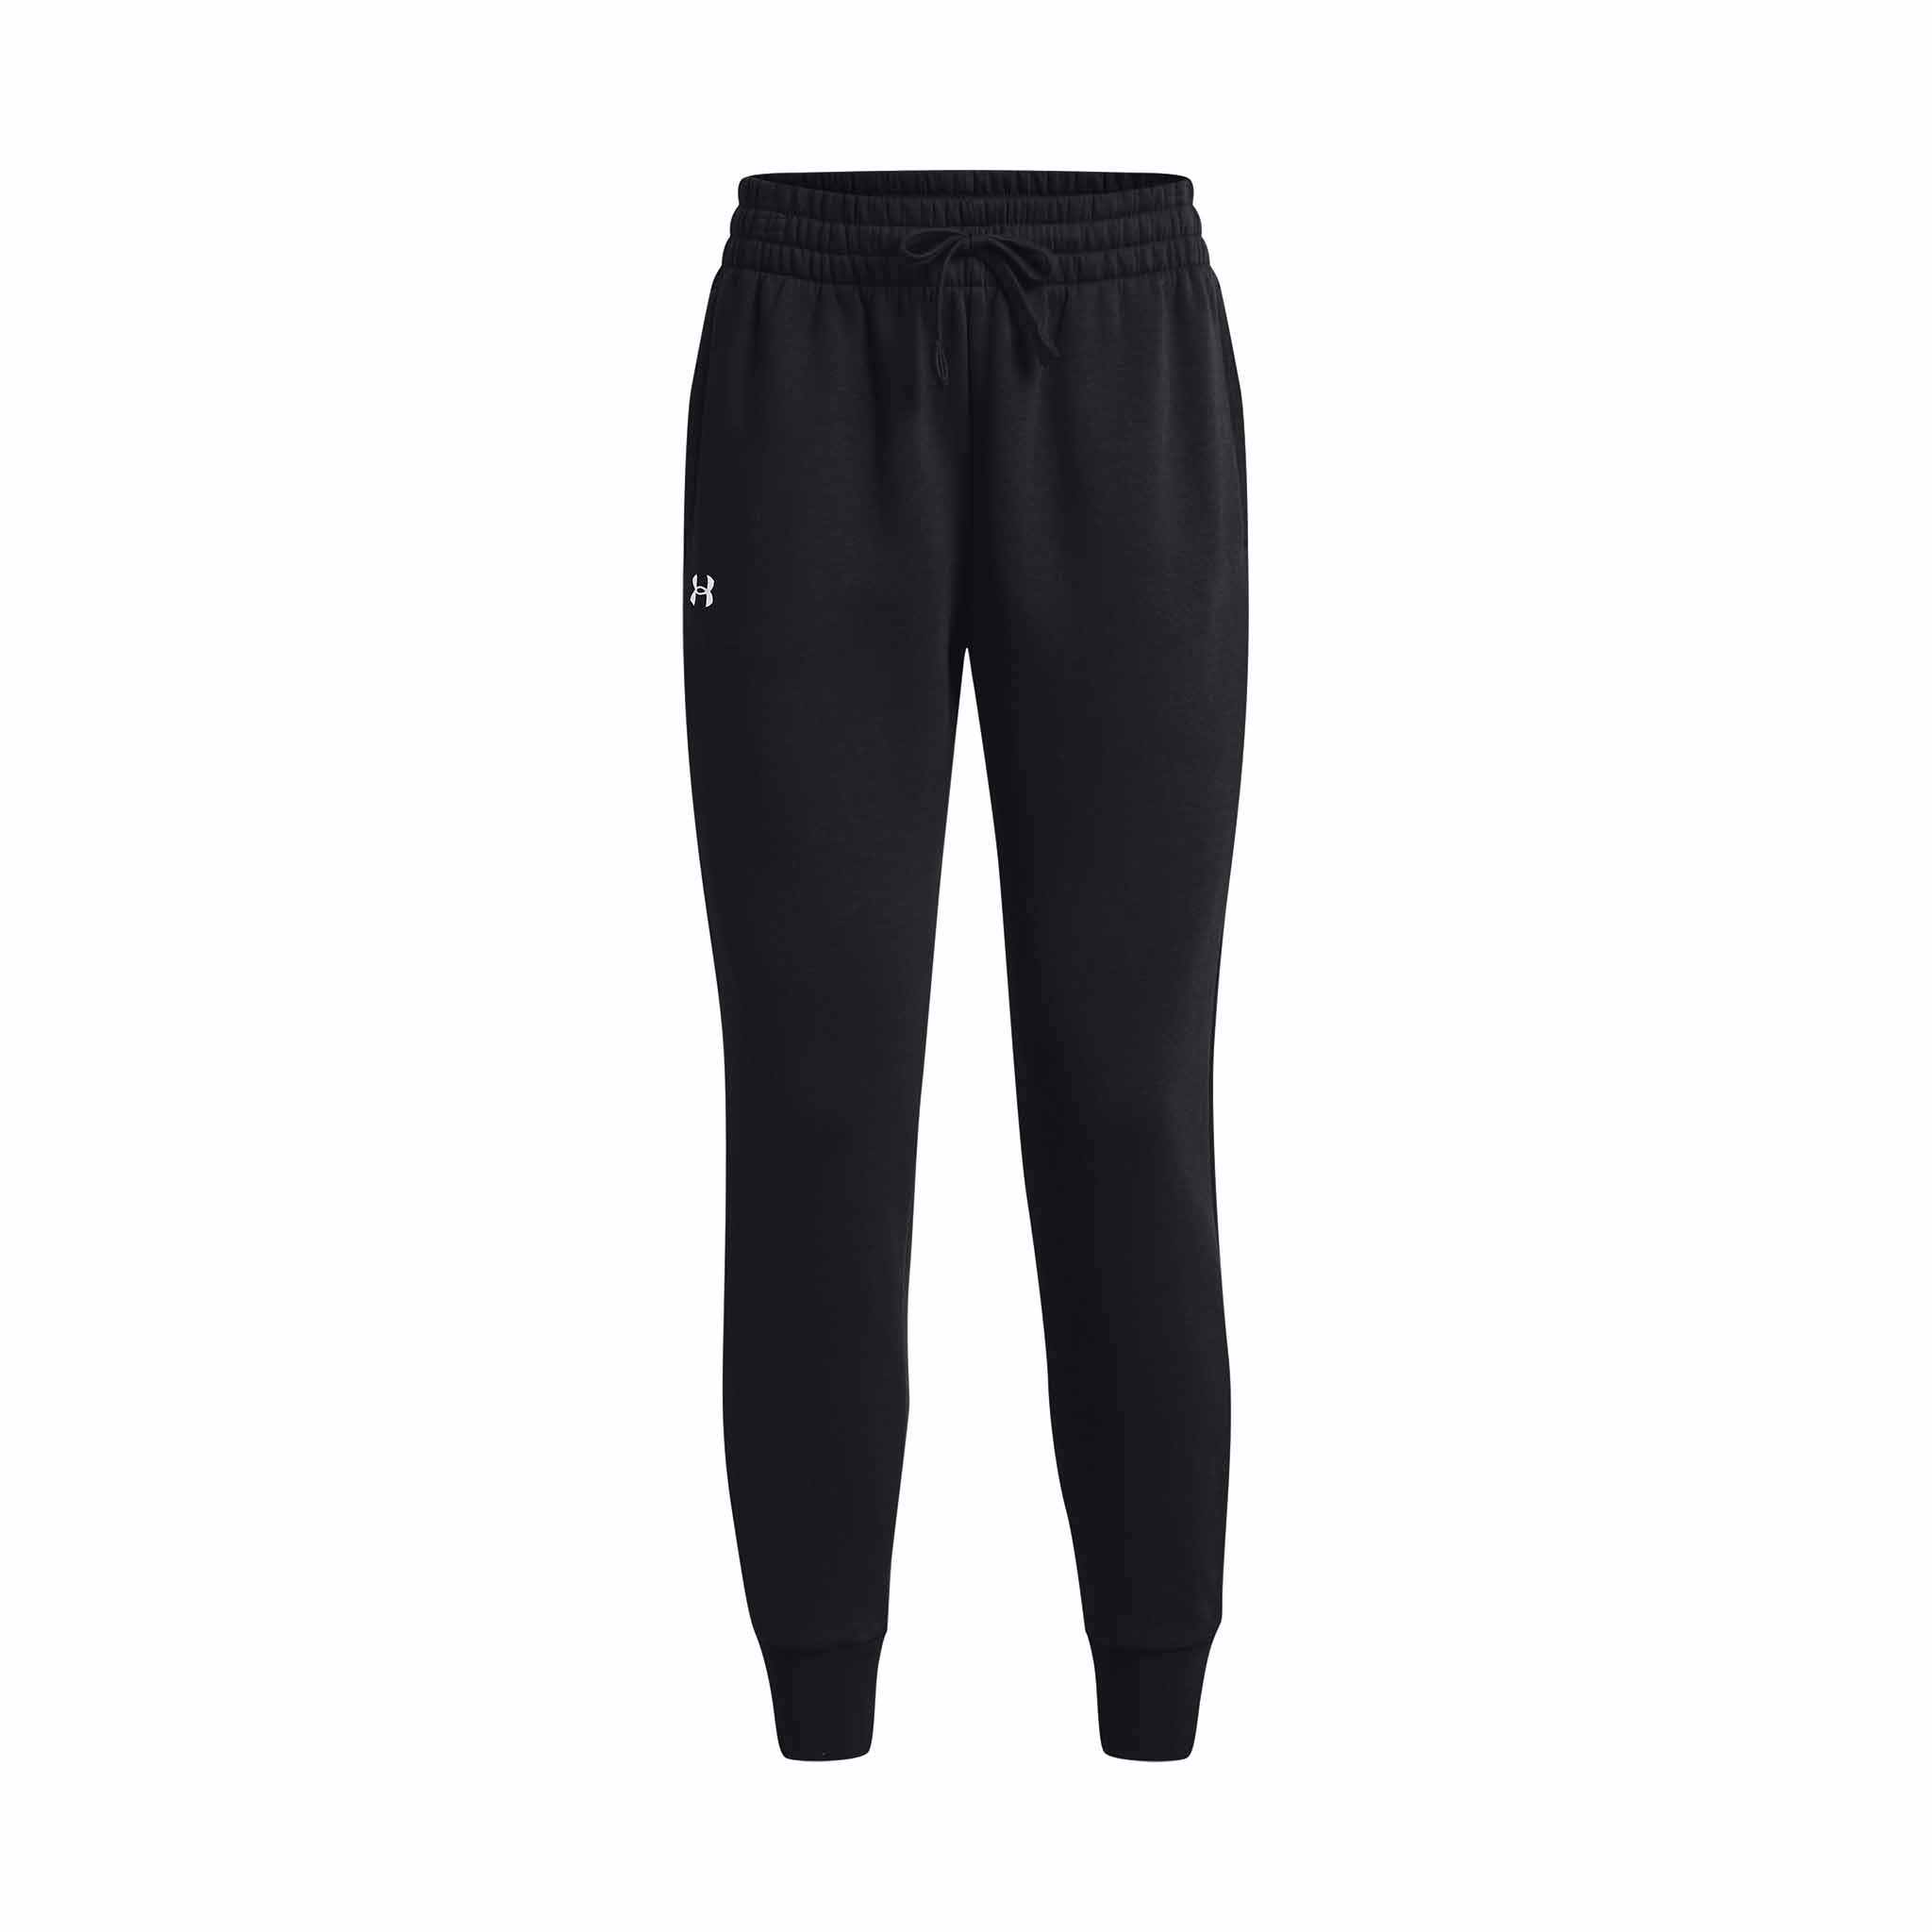 Joggers for women